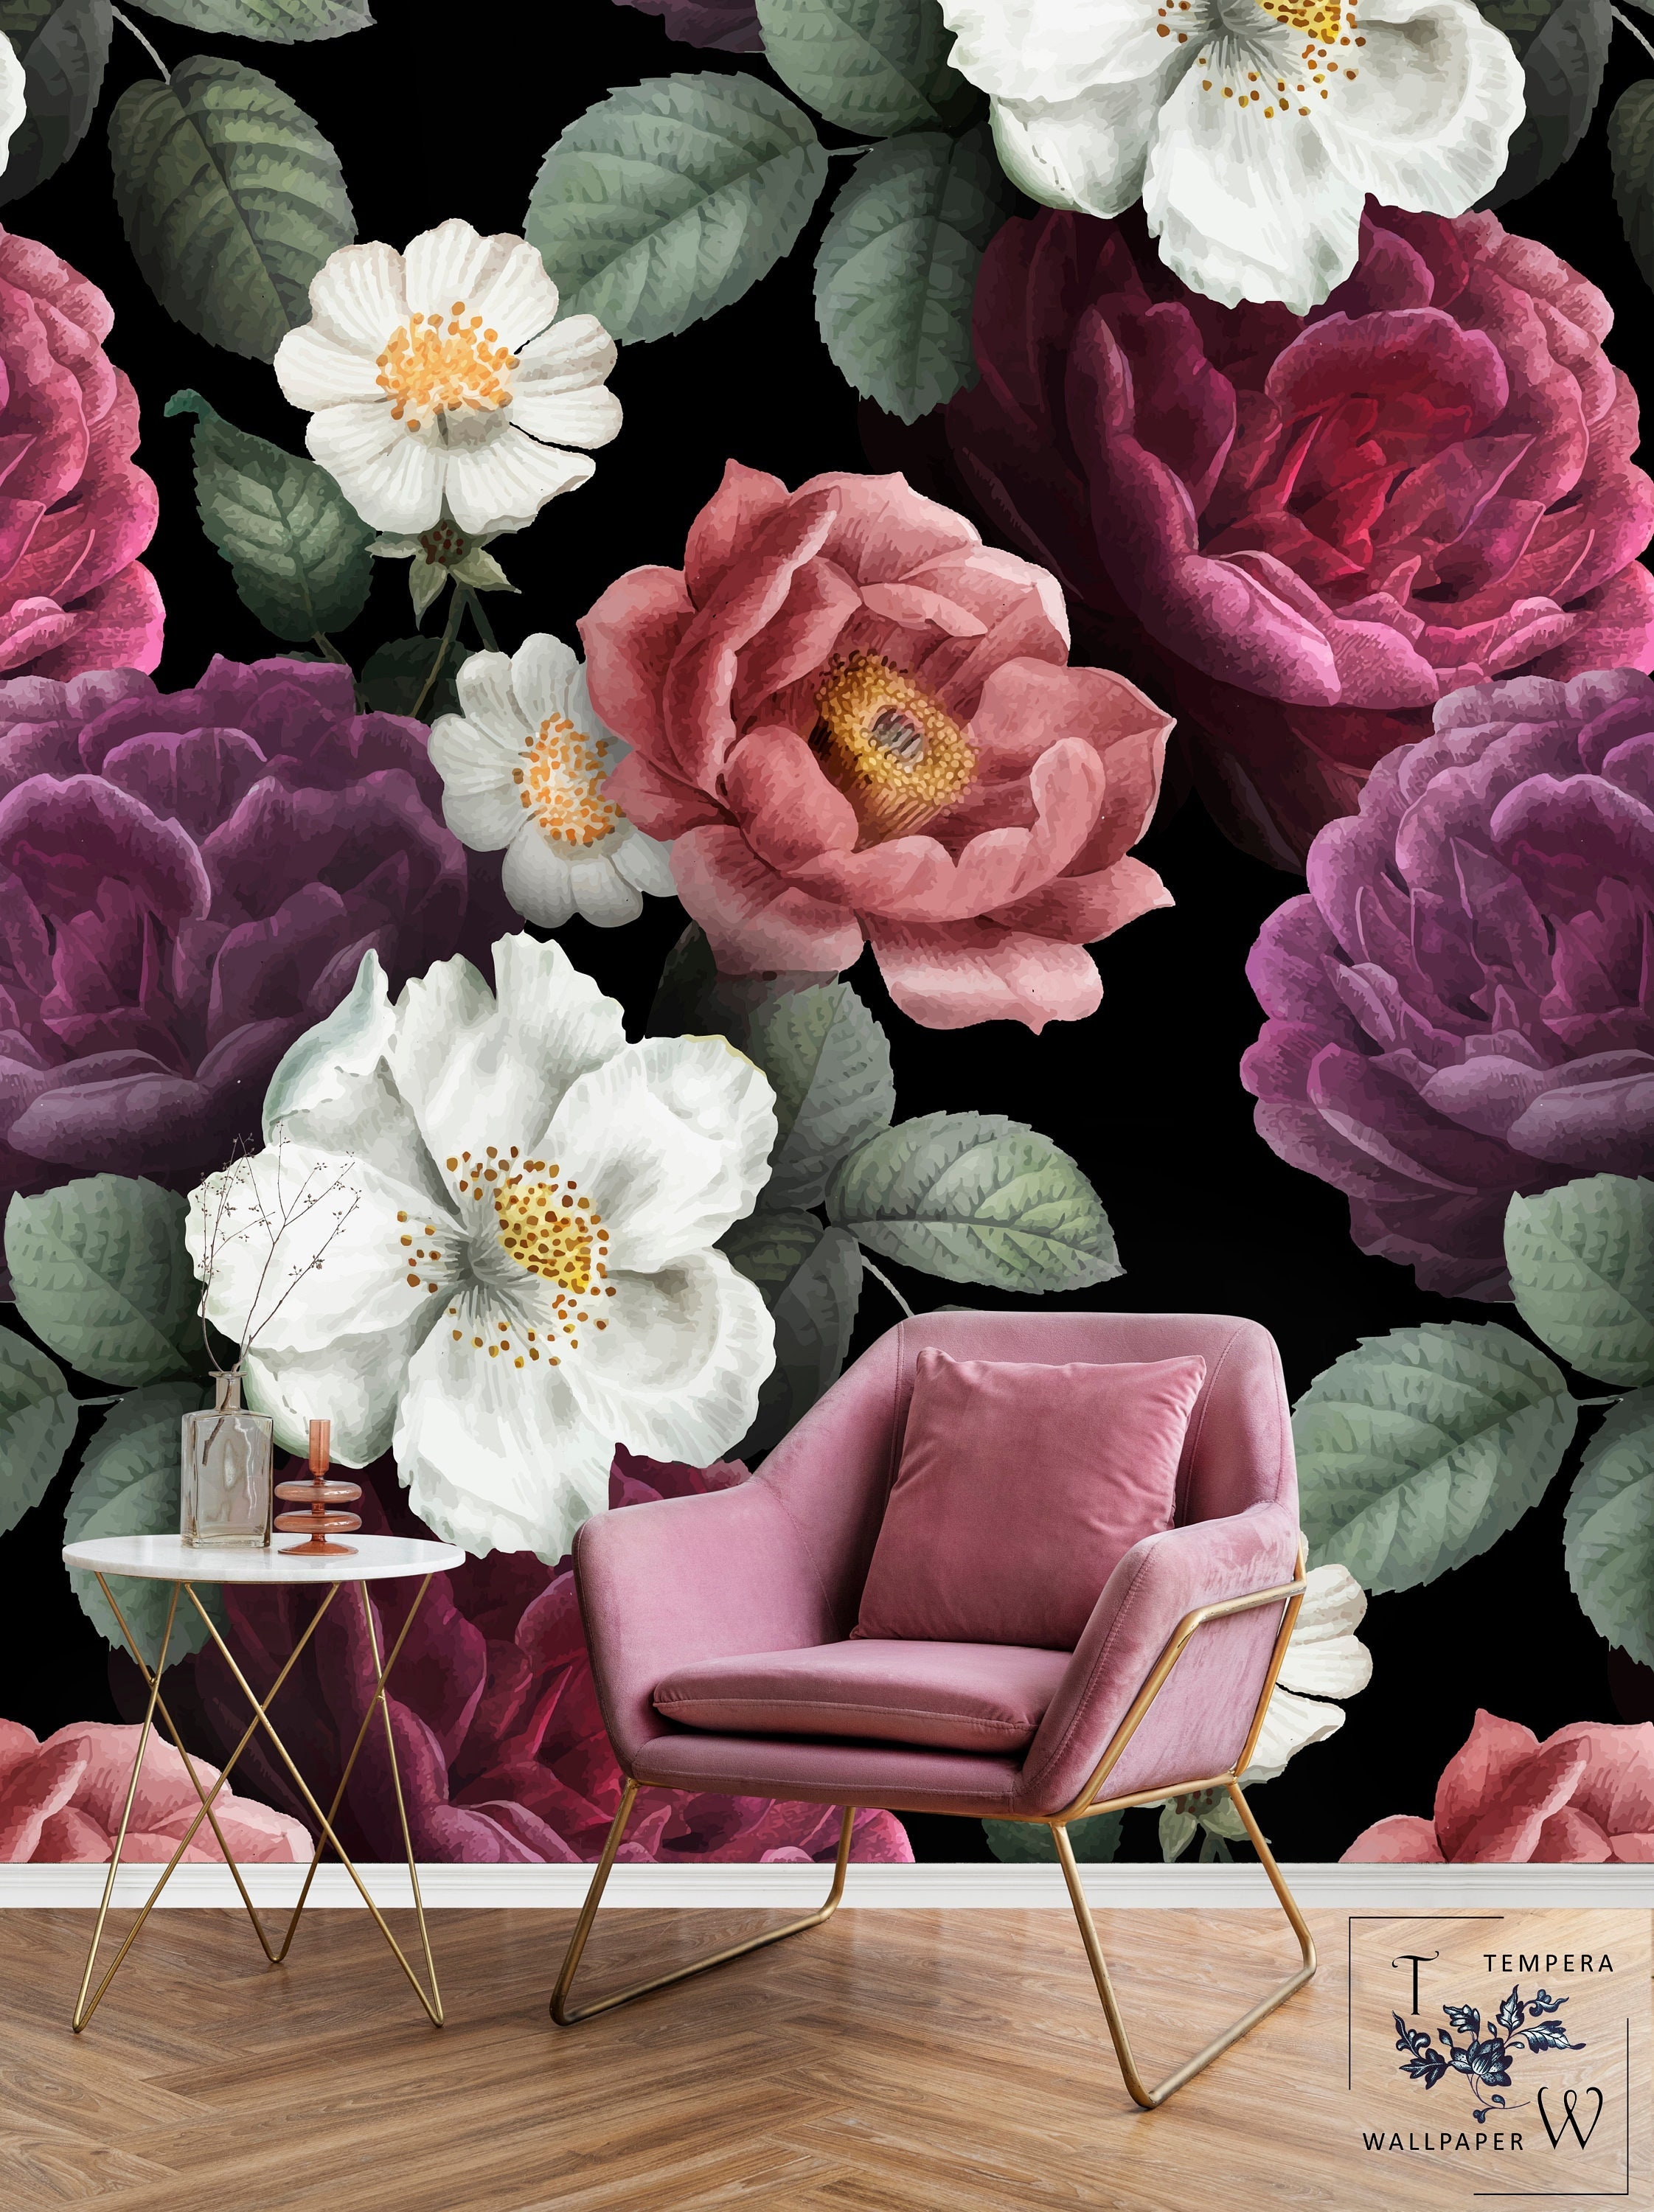 Large Floral Wallpaper Designs  5 MustHave Murals  For The Floor  More